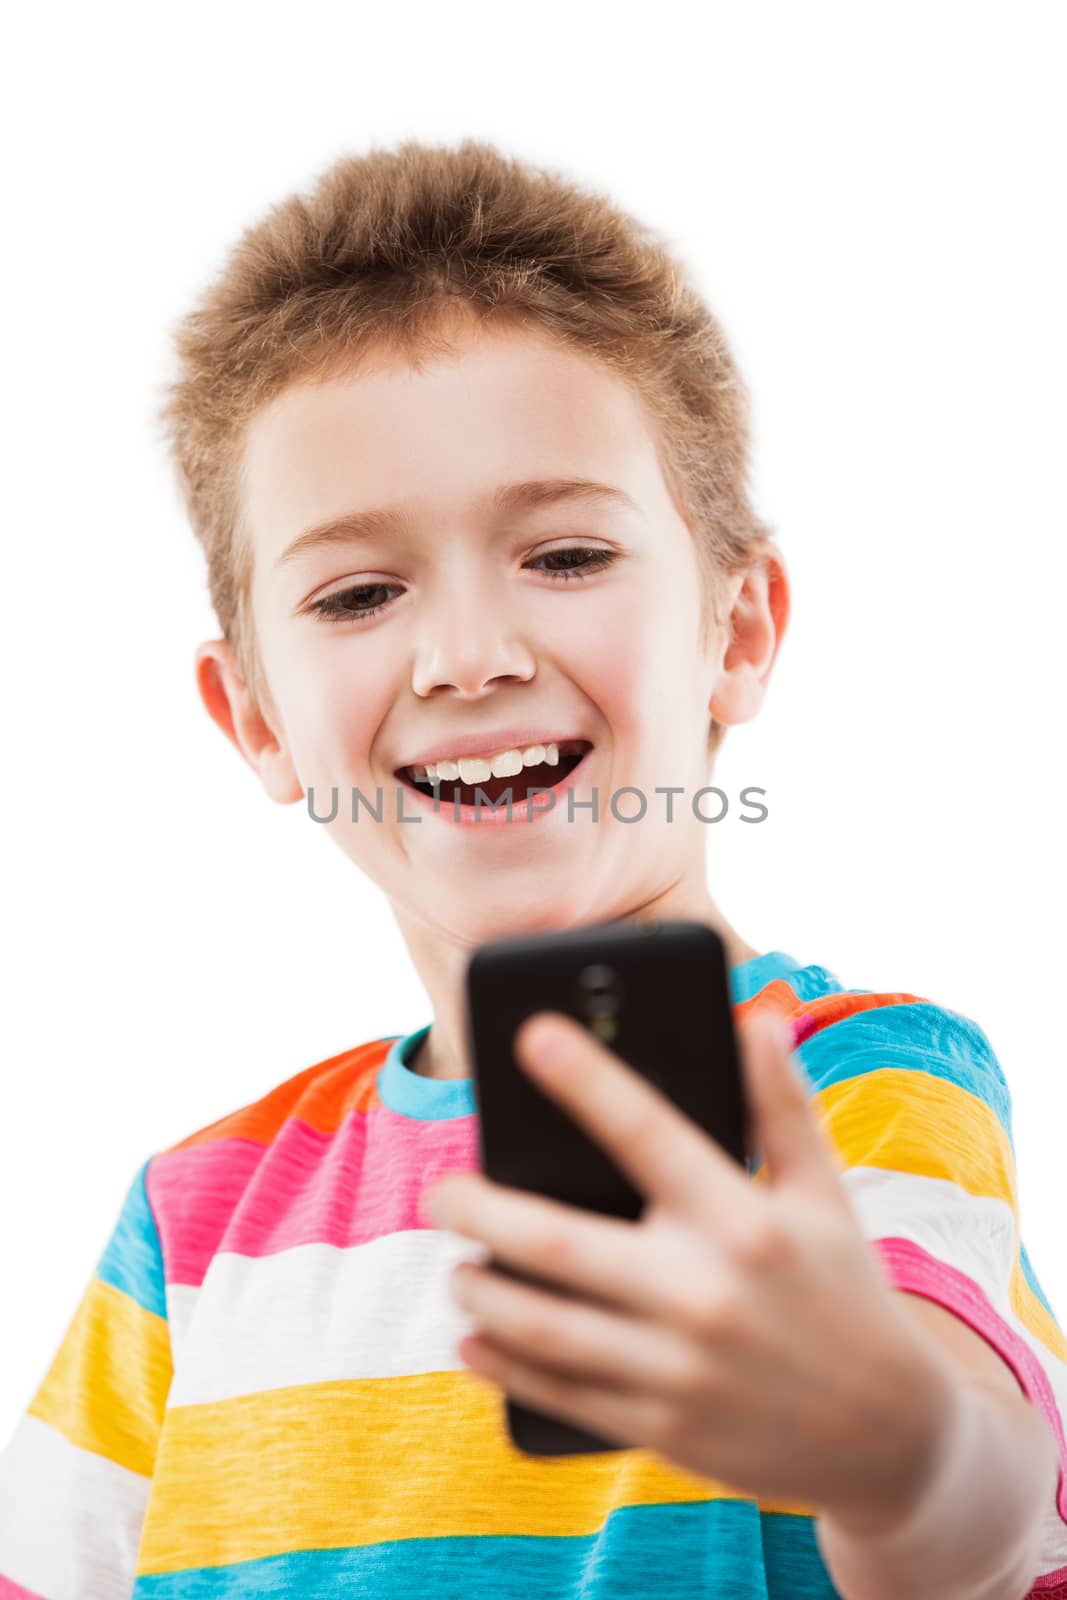 Smiling child boy holding mobile phone or smartphone taking self by ia_64